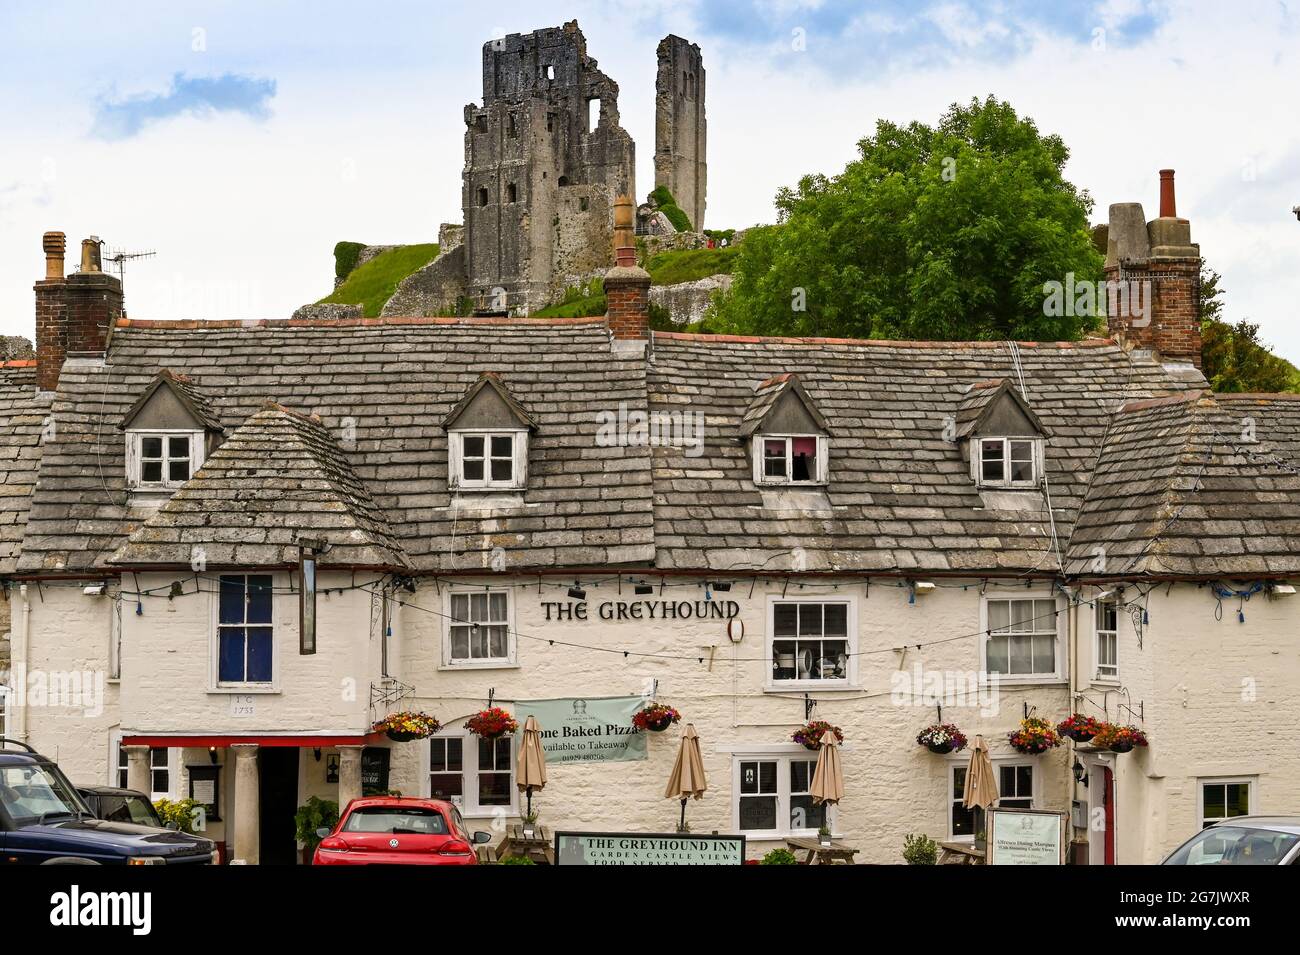 Corfe Castle, Dorset, England - June 2021: Exterior view of the Greyhound pub in the village. Stock Photo